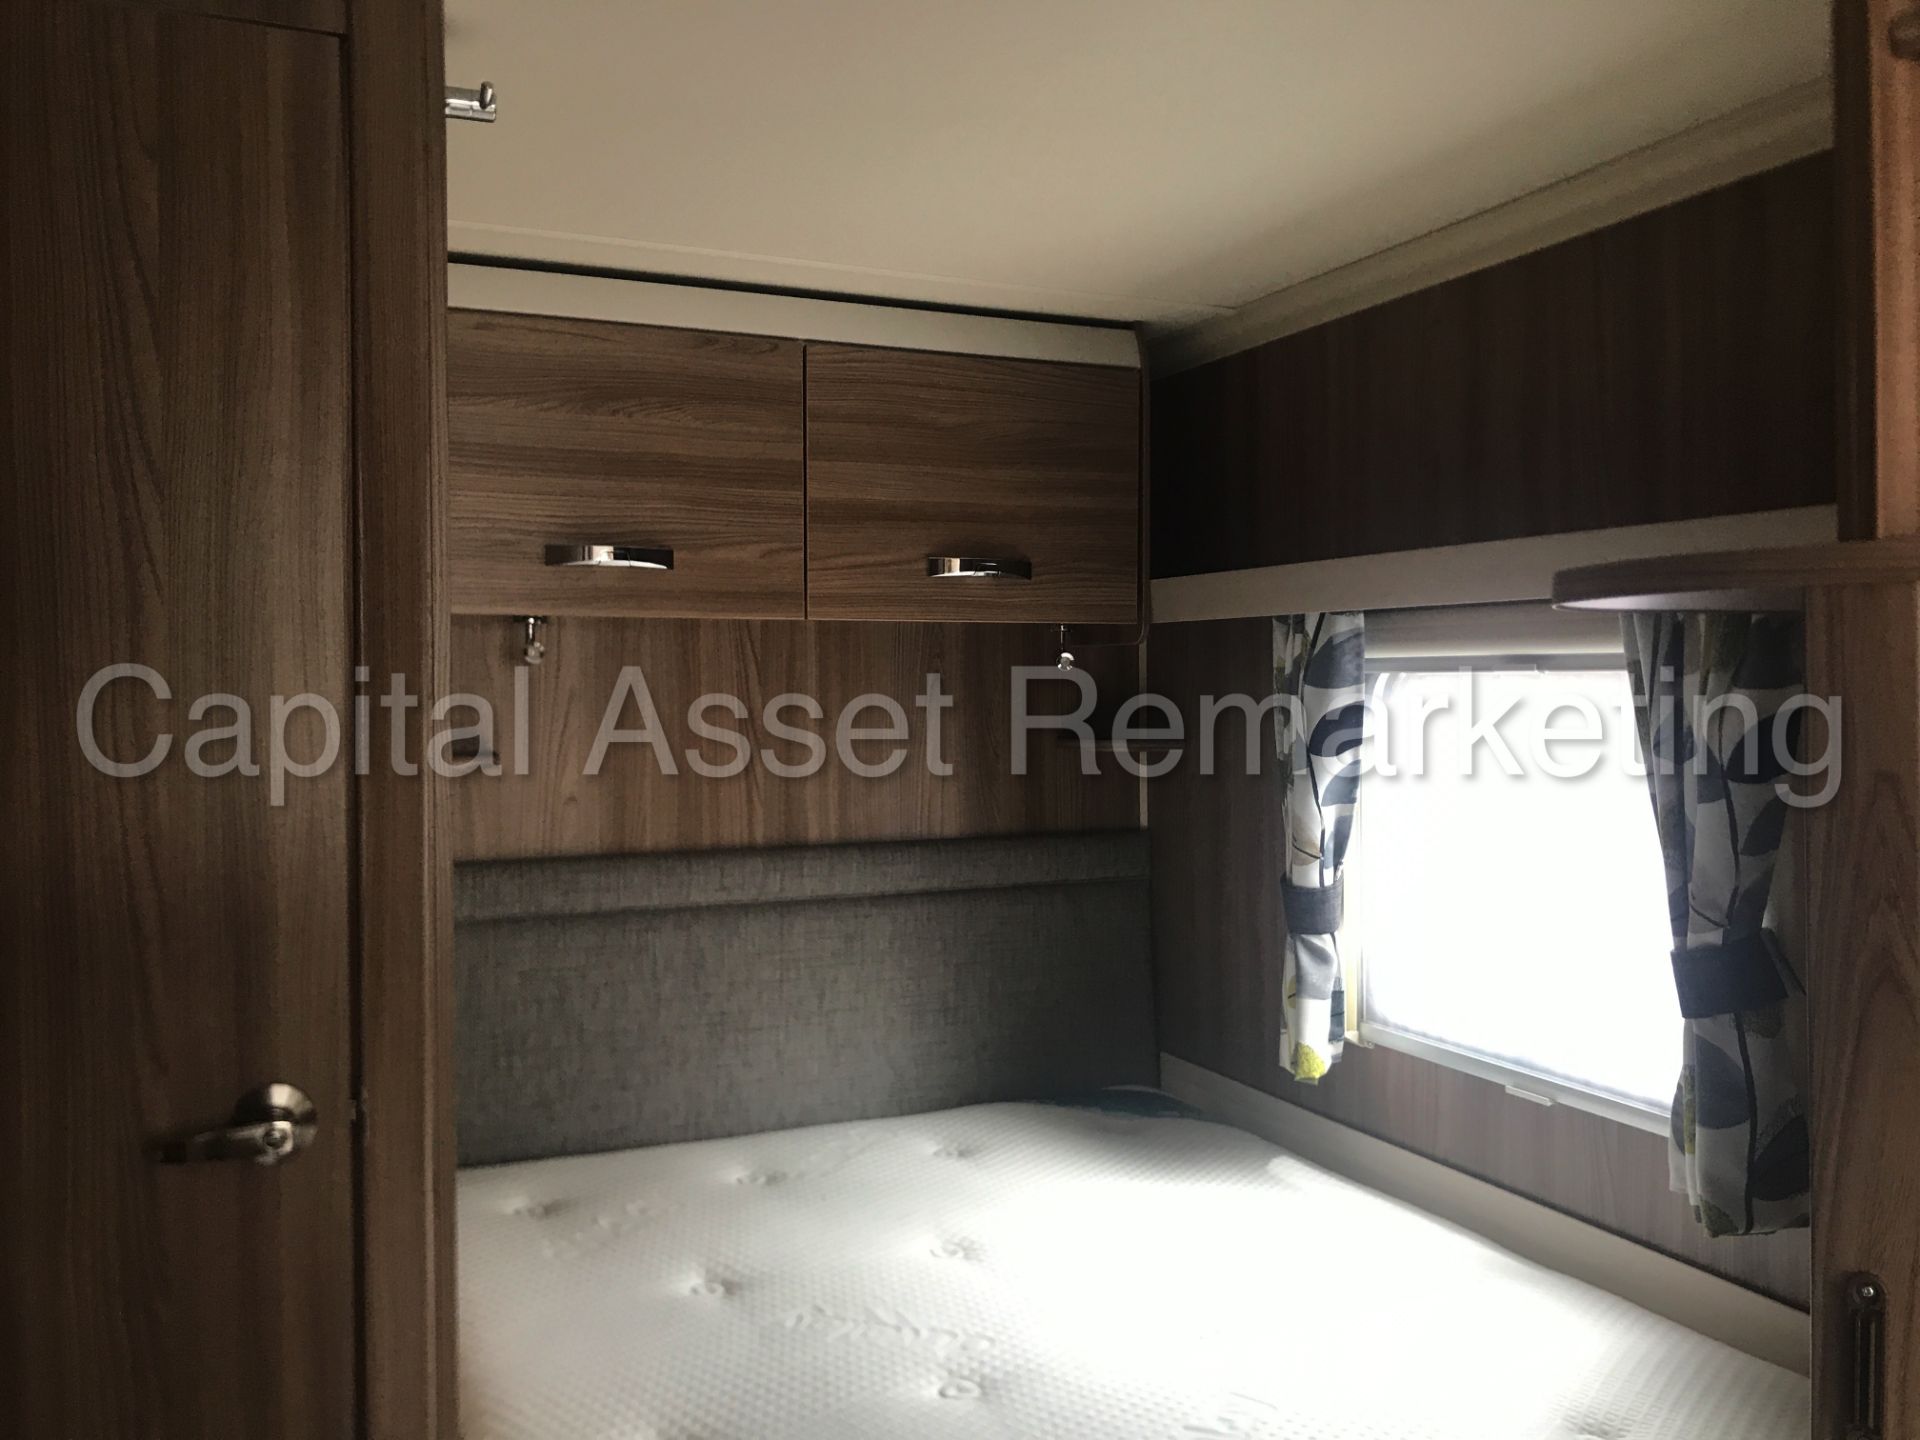 (On sale) 2017 - 'SWIFT - SPRITE QUATTRO FB' TOURING CARAVAN (1 OWNER FROM NEW) **CRIS REGISTERED** - Image 13 of 31